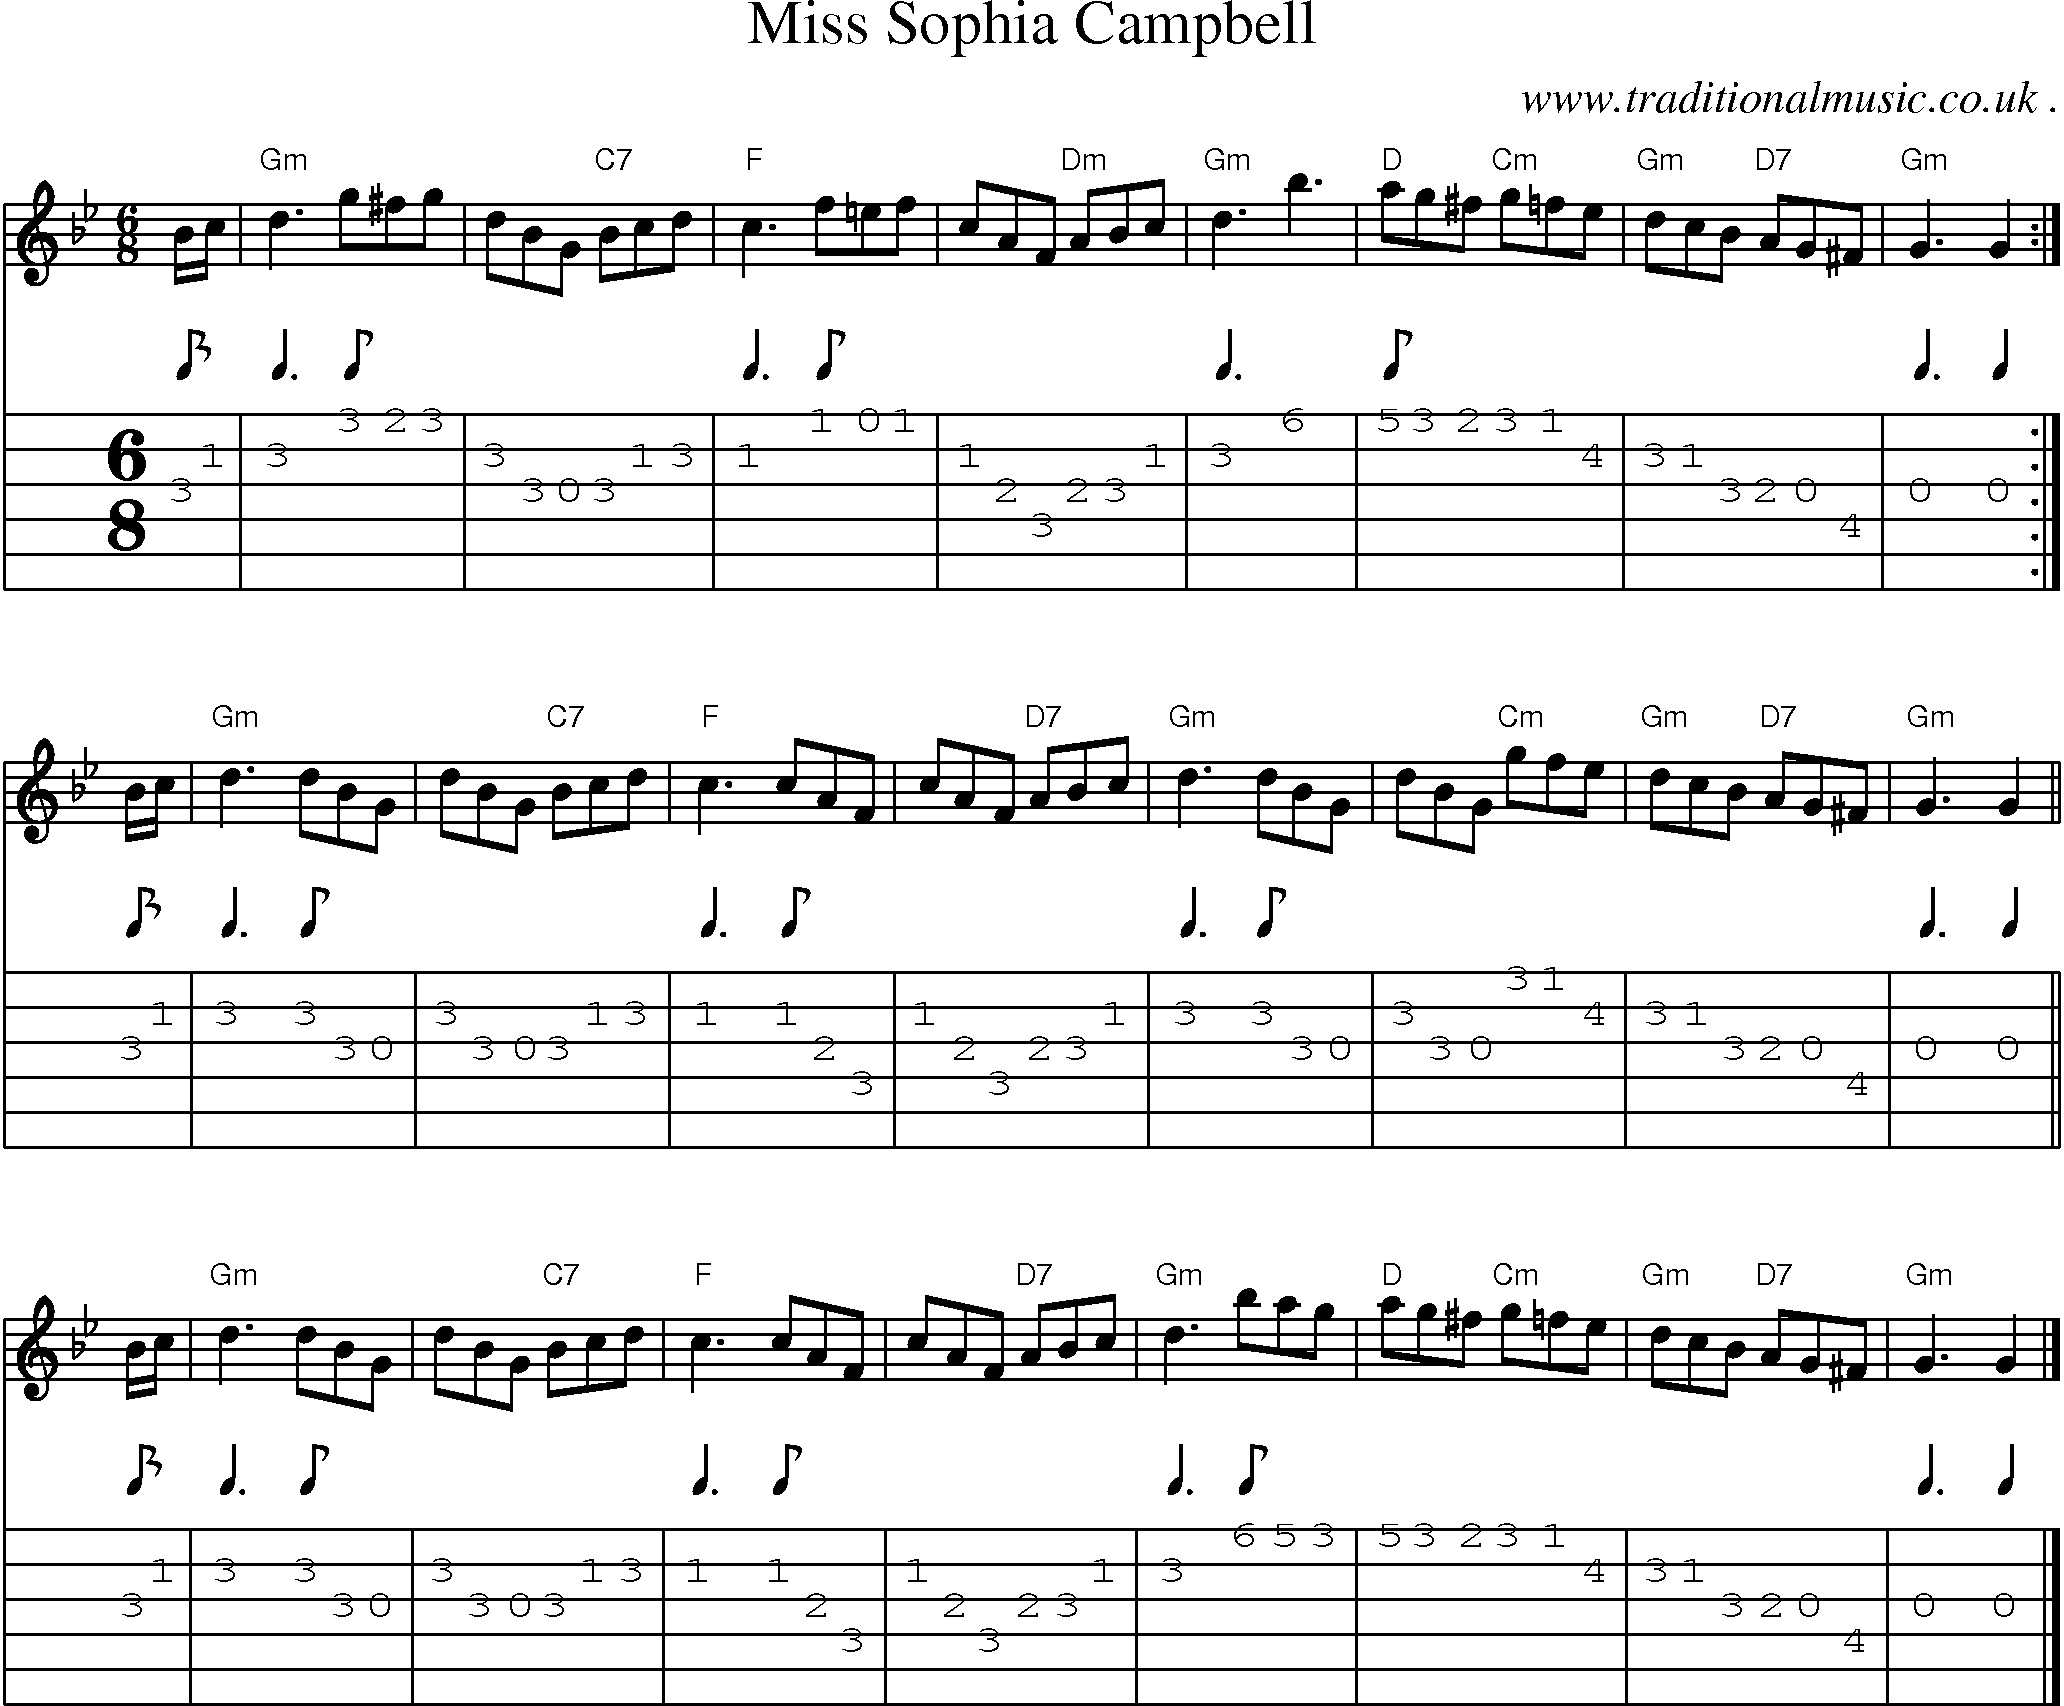 Sheet-music  score, Chords and Guitar Tabs for Miss Sophia Campbell